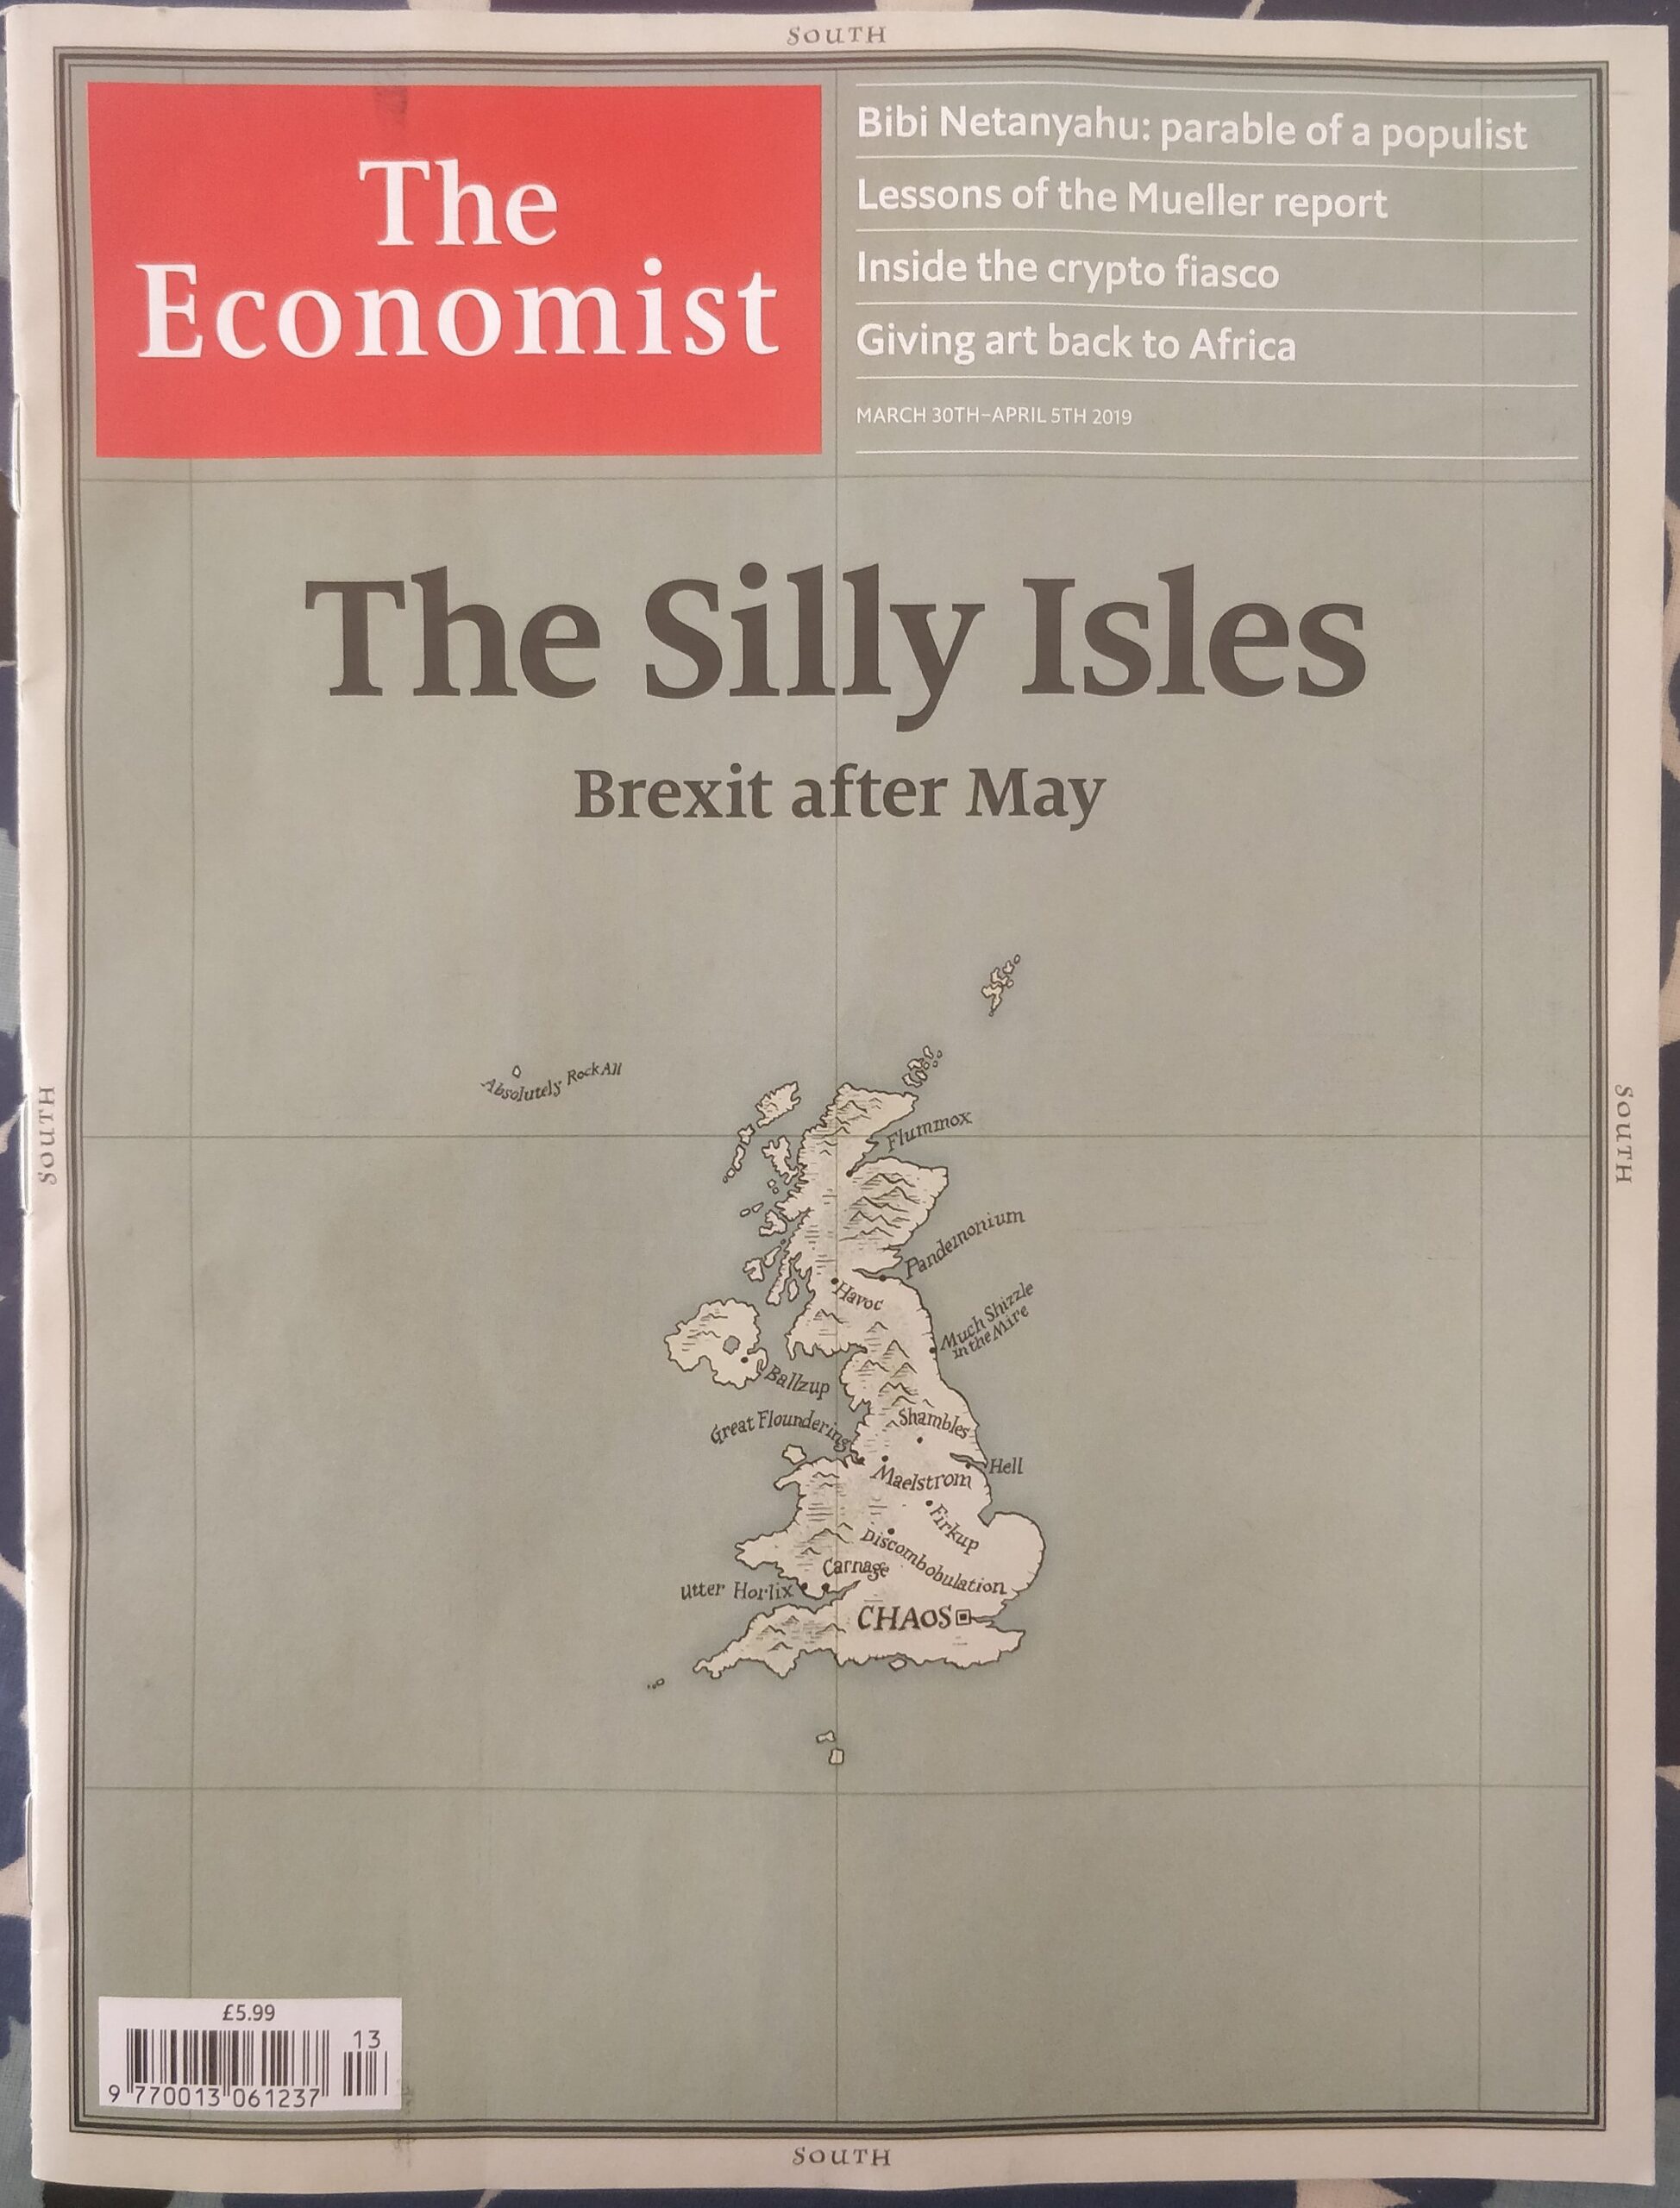 The Silly Isles, Brexit after May